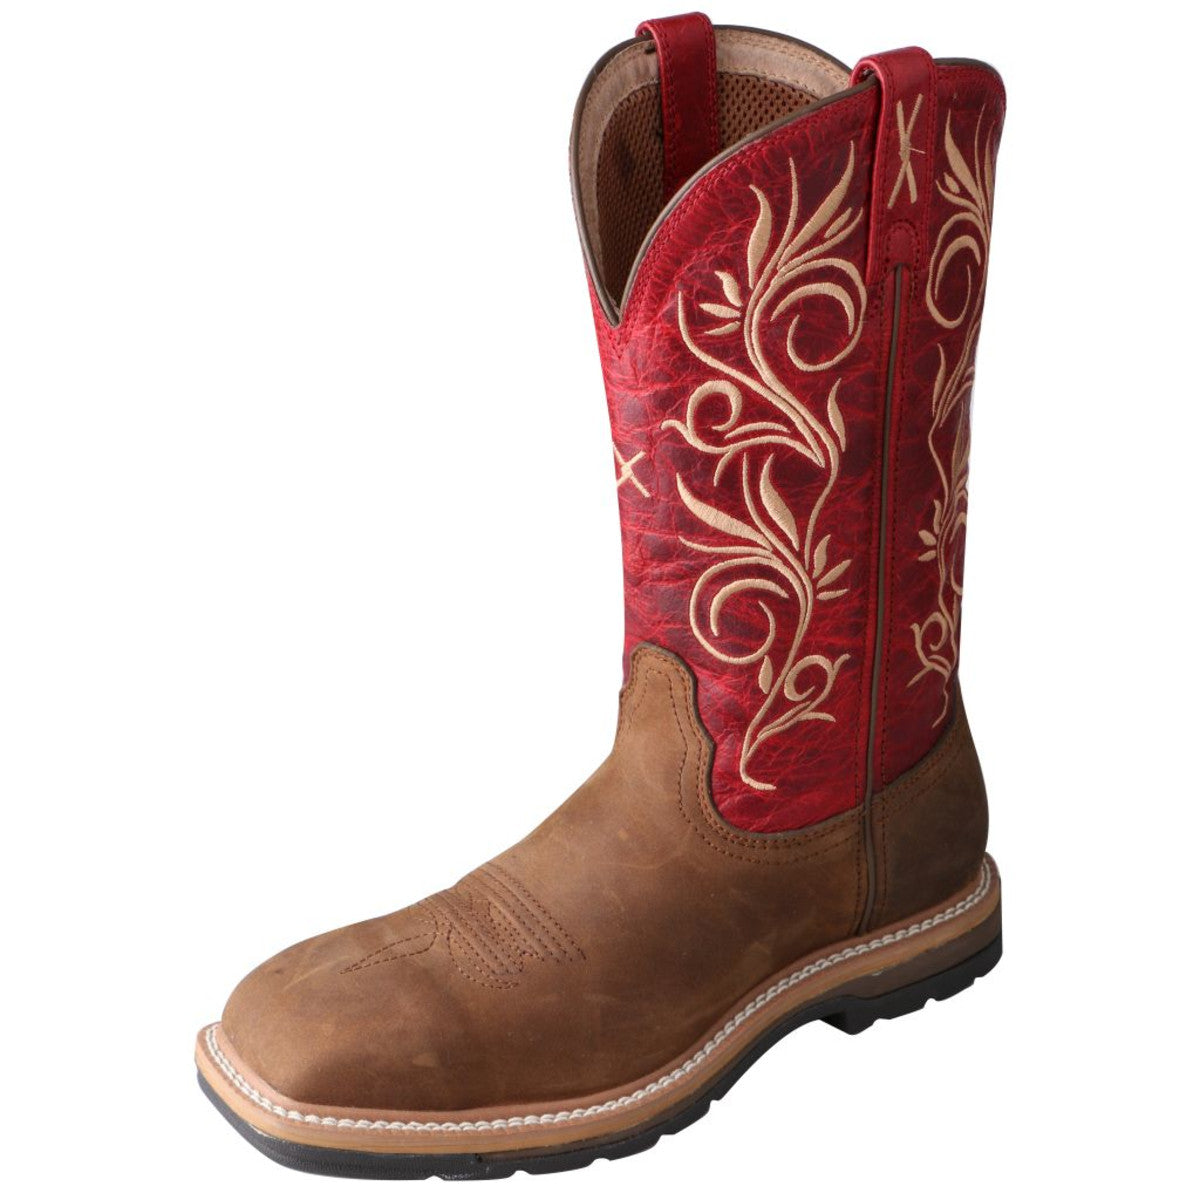 Women's Twisted X 11" Steel Toe Lite Western Work Boot in Distressed Latigo & Red from the front